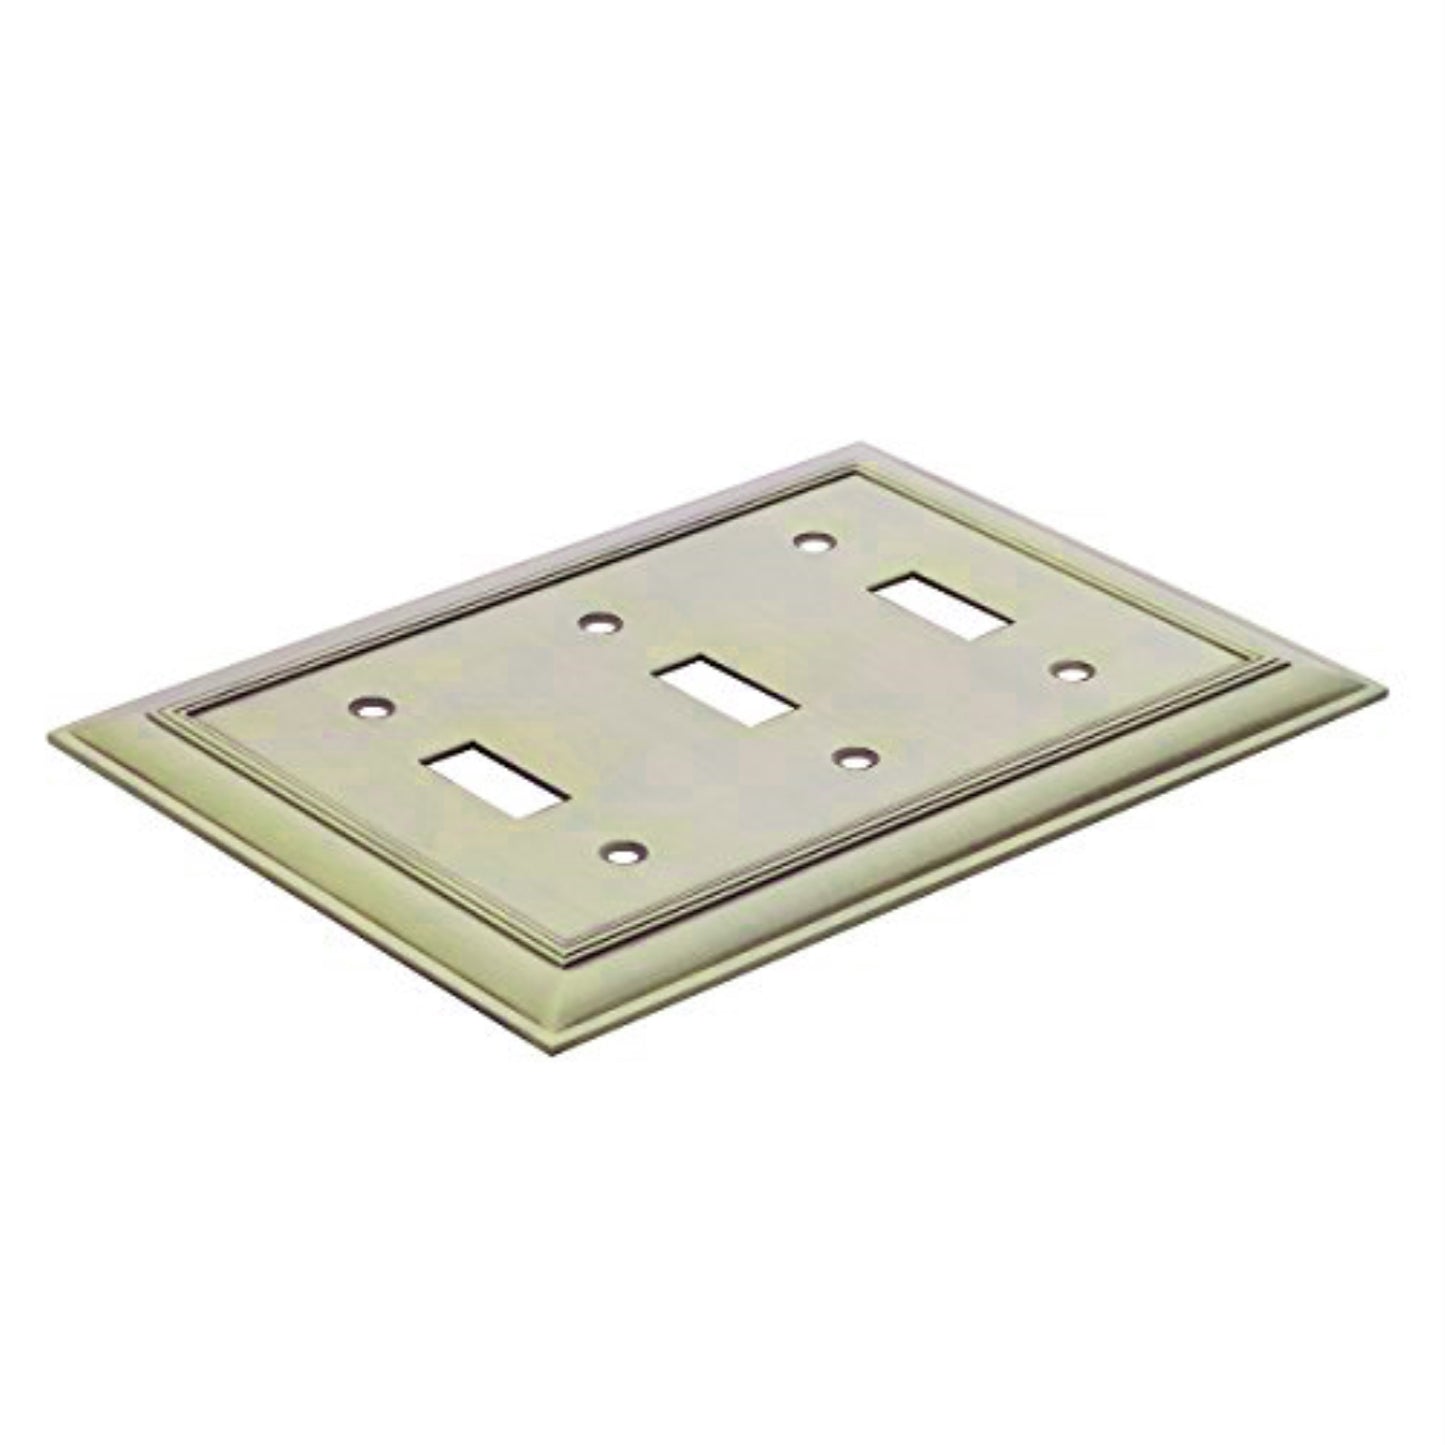 South Main Hardware Triple Toggle Wall Plate, Antique Brass, 1-Pack